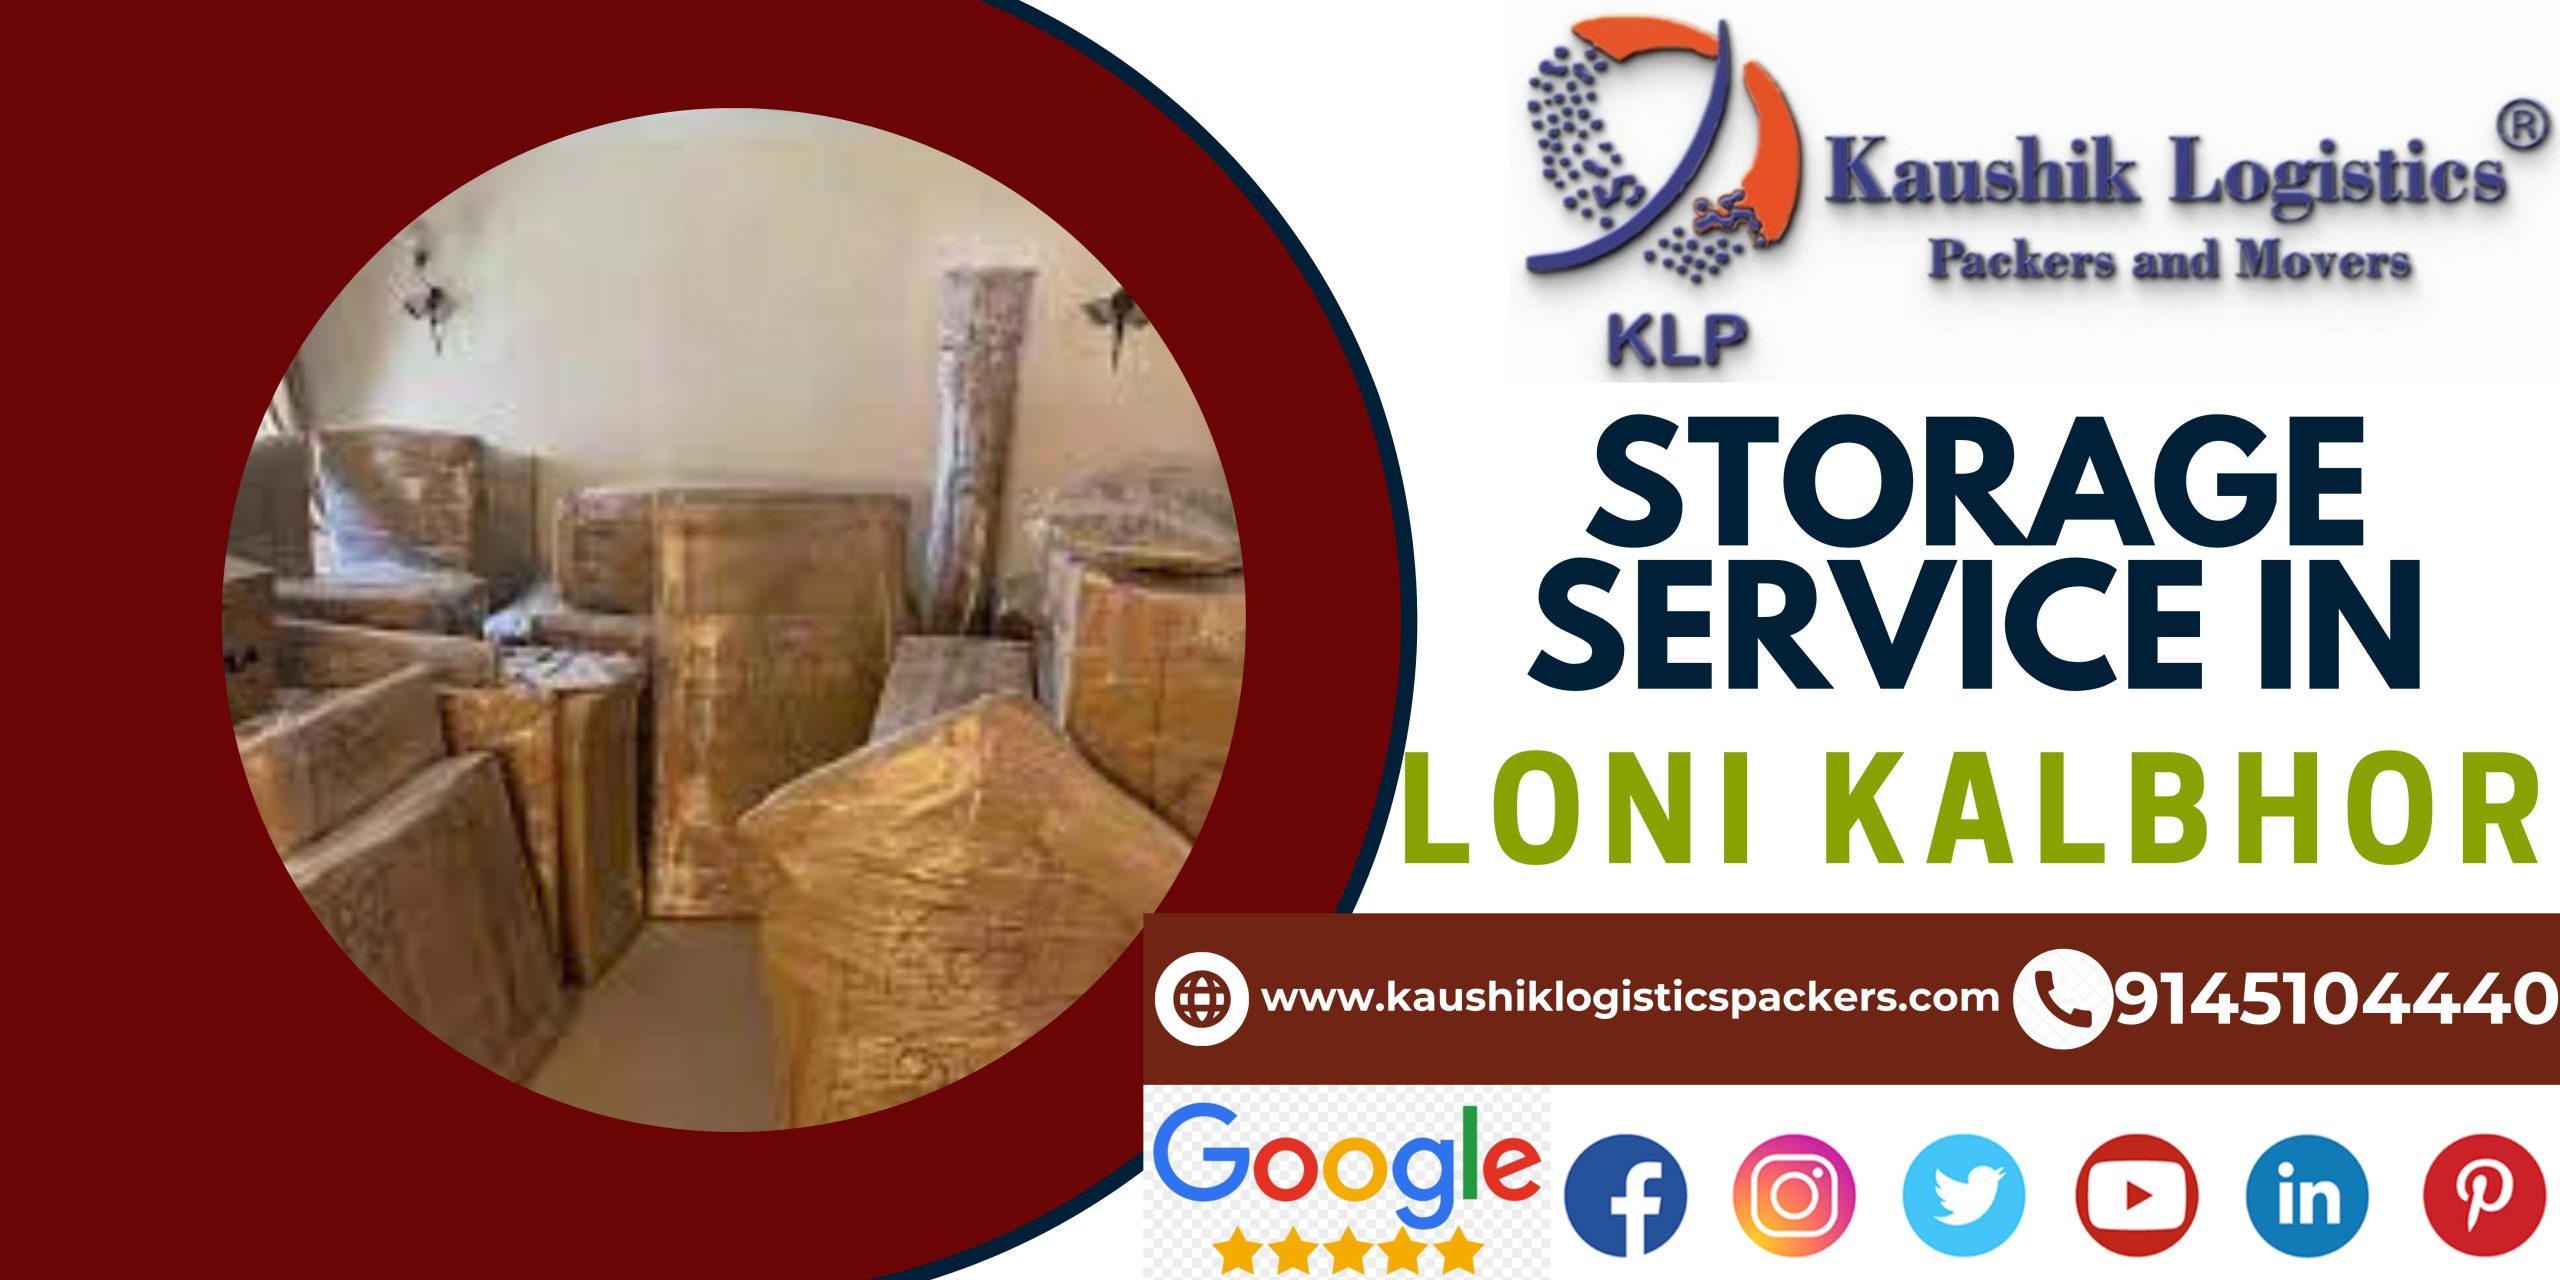 Packers and Movers In Loni Kalbhor